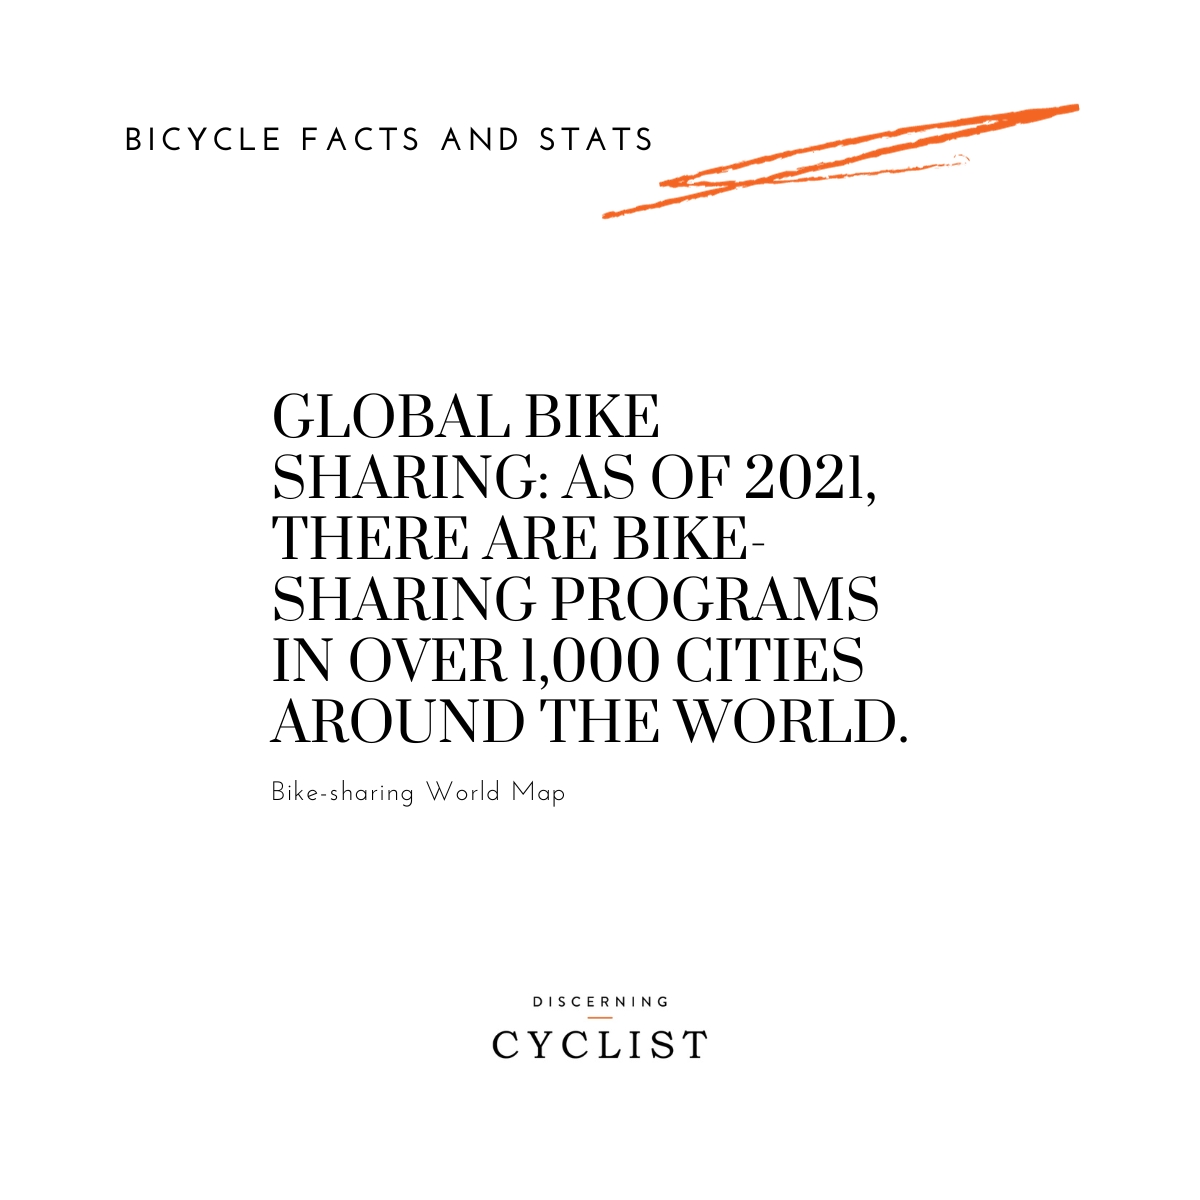 Global Bike Sharing: As of 2021, there are bike-sharing programs in over 1,000 cities around the world.